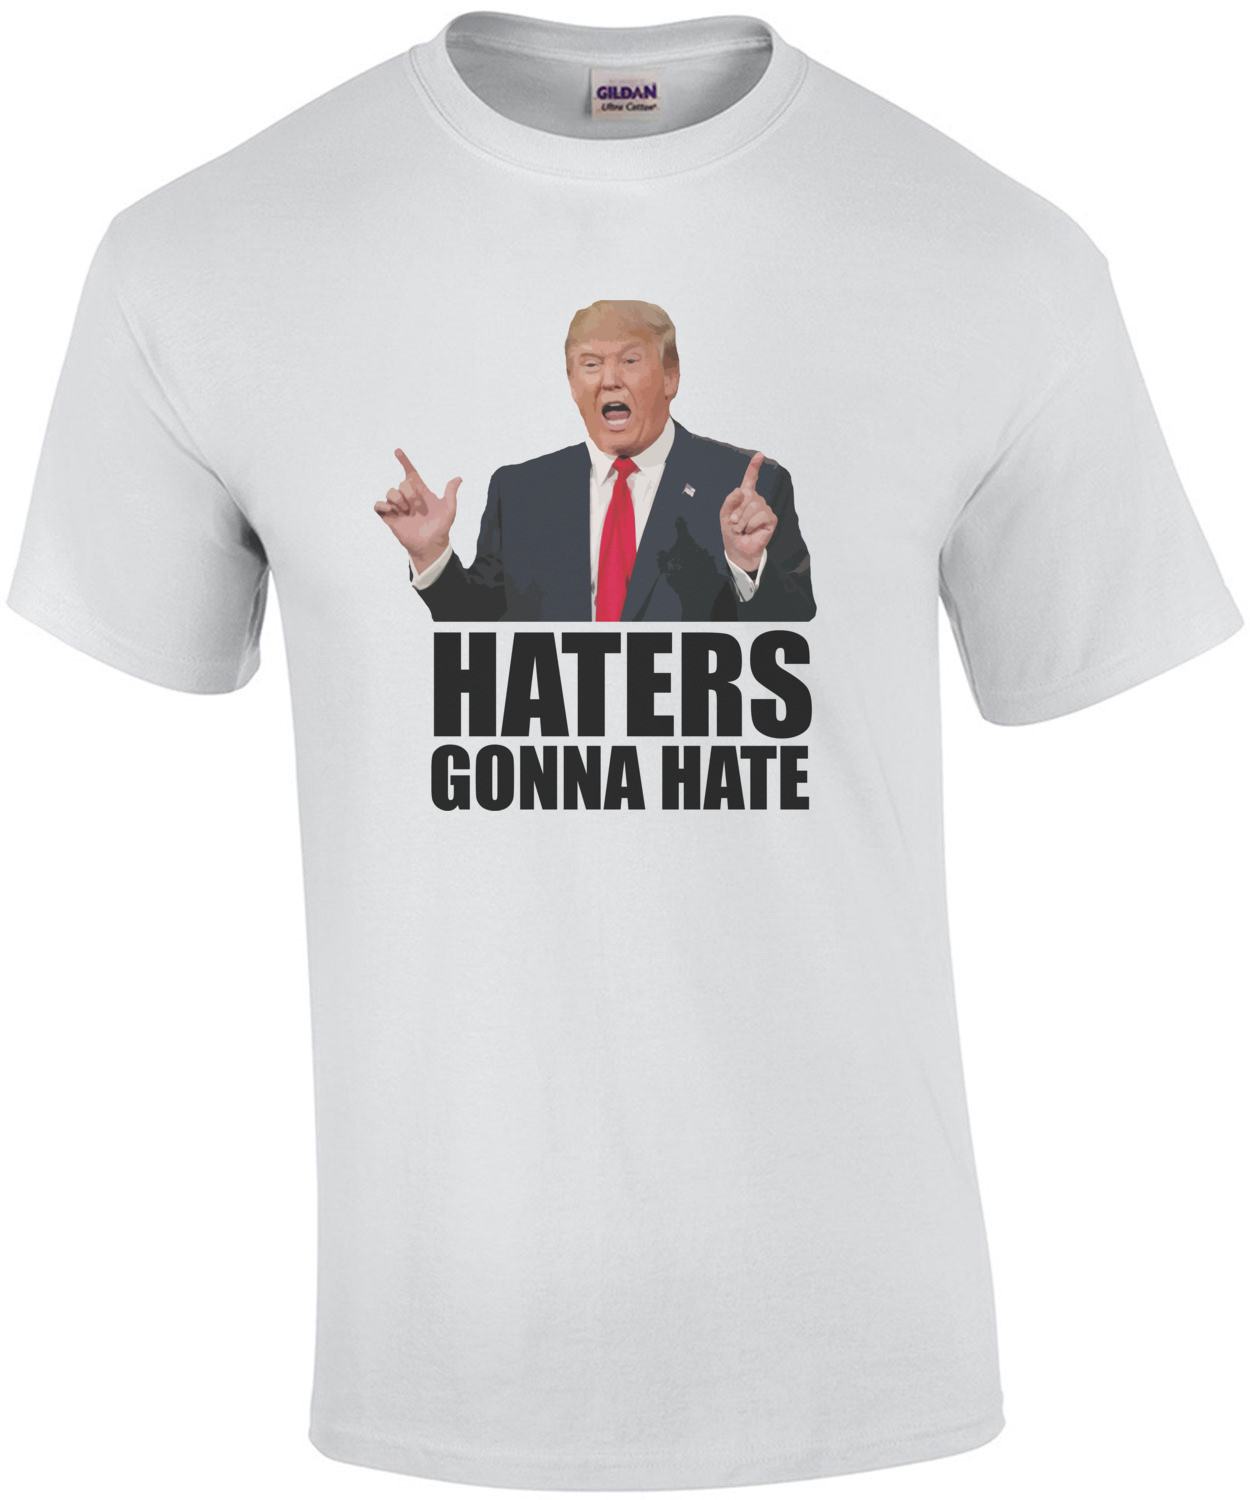 Haters gonna hate - Donald Trump Yellow T-Shirt